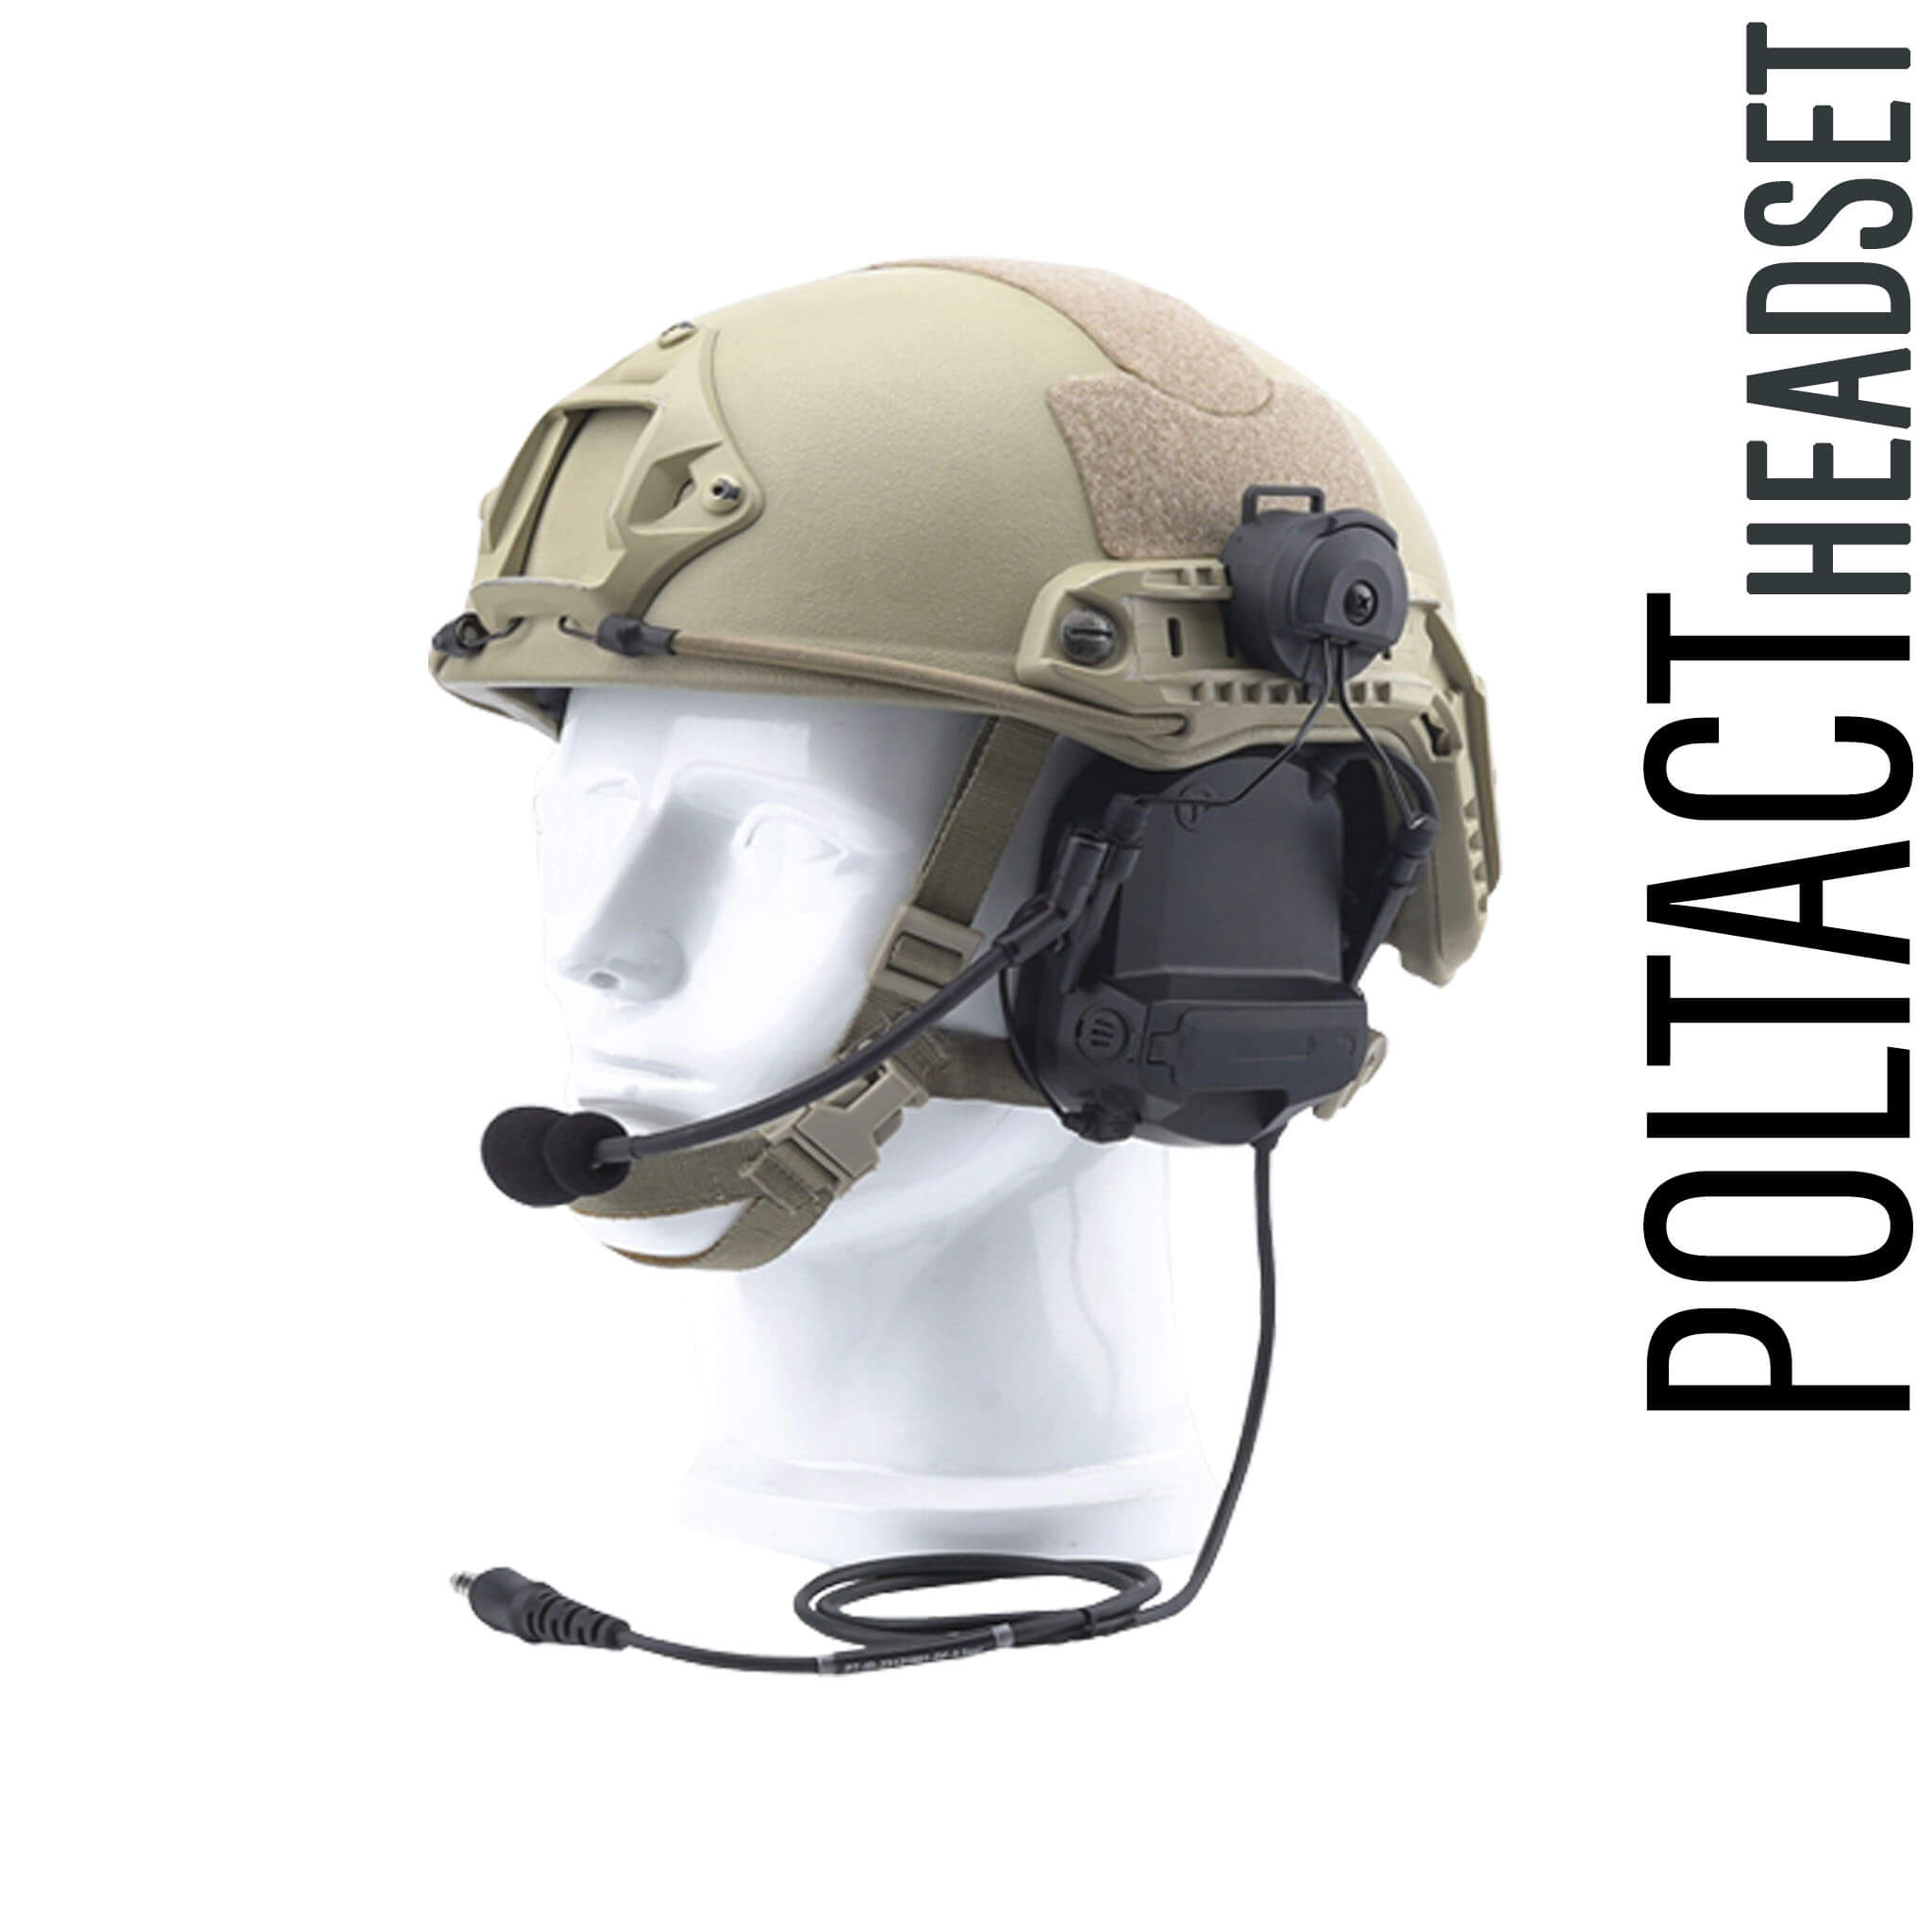 PolTact Helmet Headset Kit: PTH-V2-34 - Guaranteed to work w/: Motorola APX900 APX1000 APX4000 APX6000/XE APX7000/L/XE APX8000 "Apex" XPR6100 XPR6300 XPR6350 XPR6380 XPR6500 XPR6550 PR6580 XPR7350/e XPR7380/e XPR7550/e & more